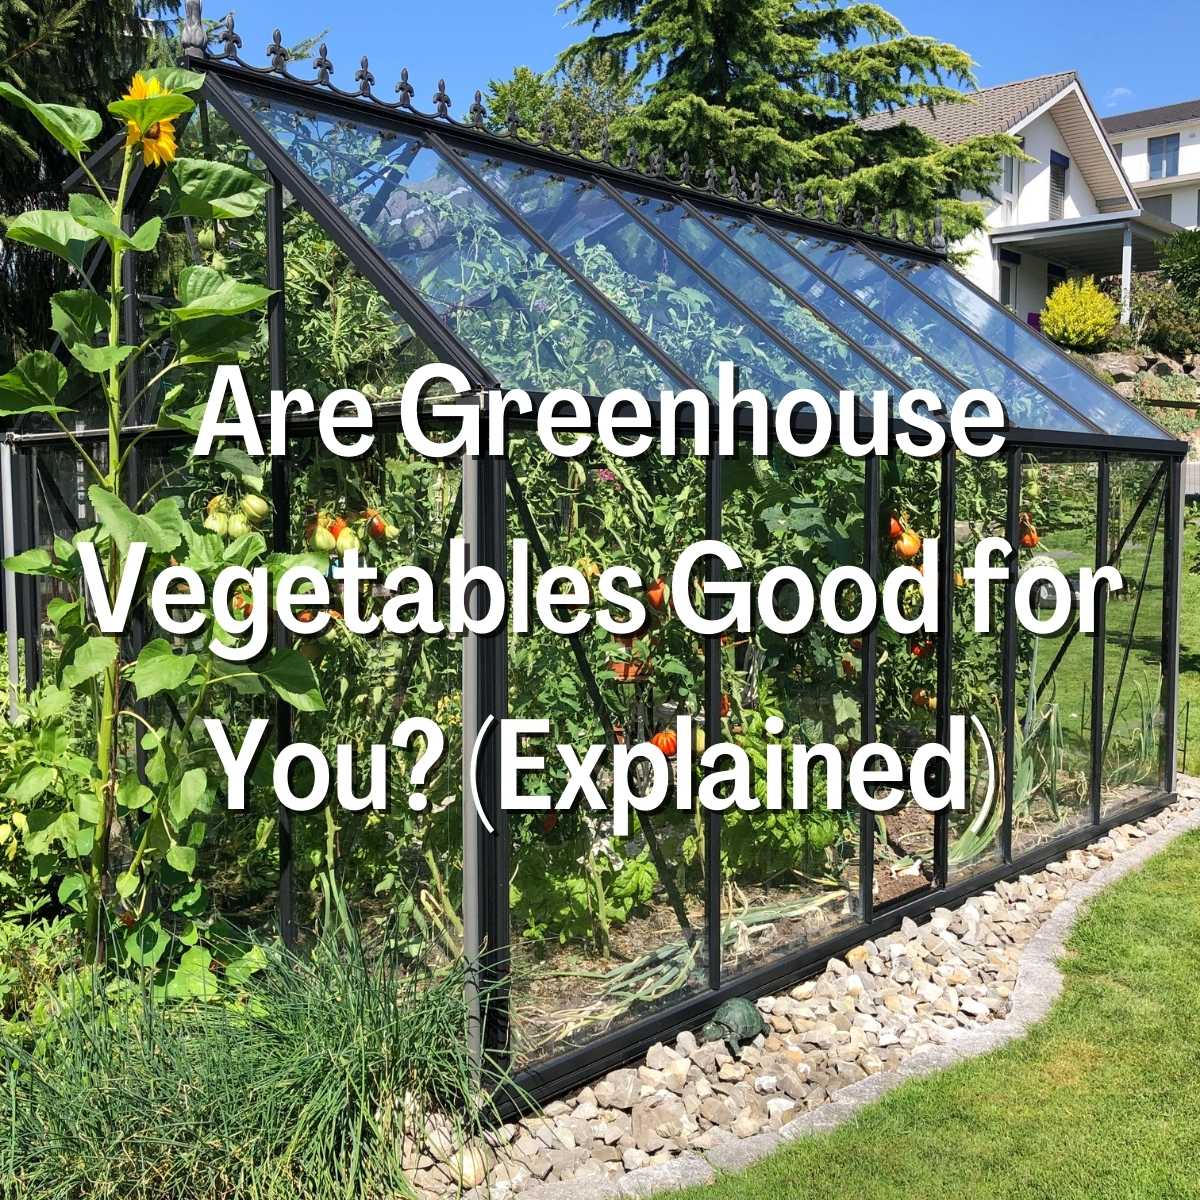 Are Greenhouse Vegetables Good for You